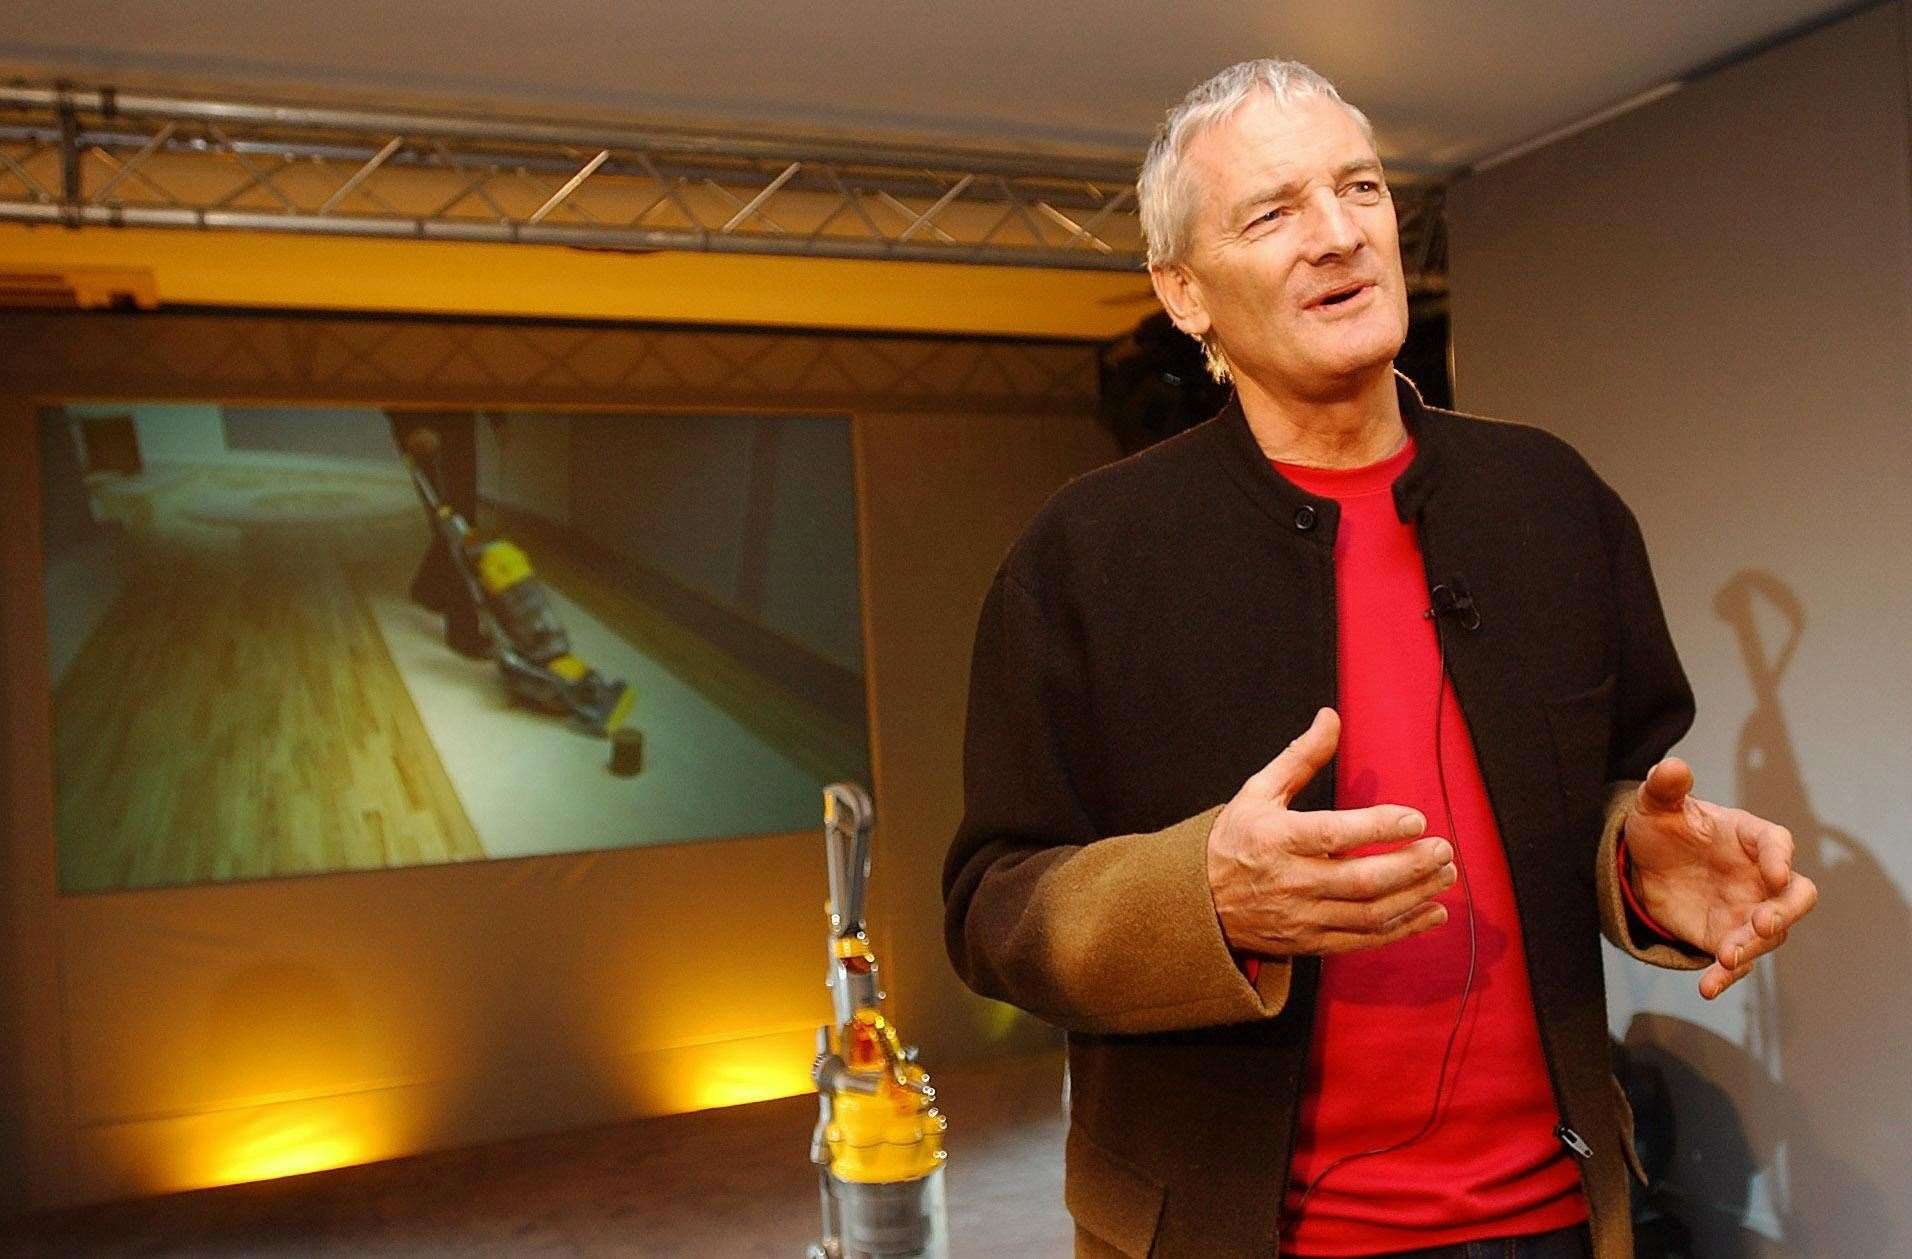 British inventor Sir James Dyson was the second richest person on the 2022 Sunday Times Rich List in August at £23 billion (Matthew Fearn/PA Archive)